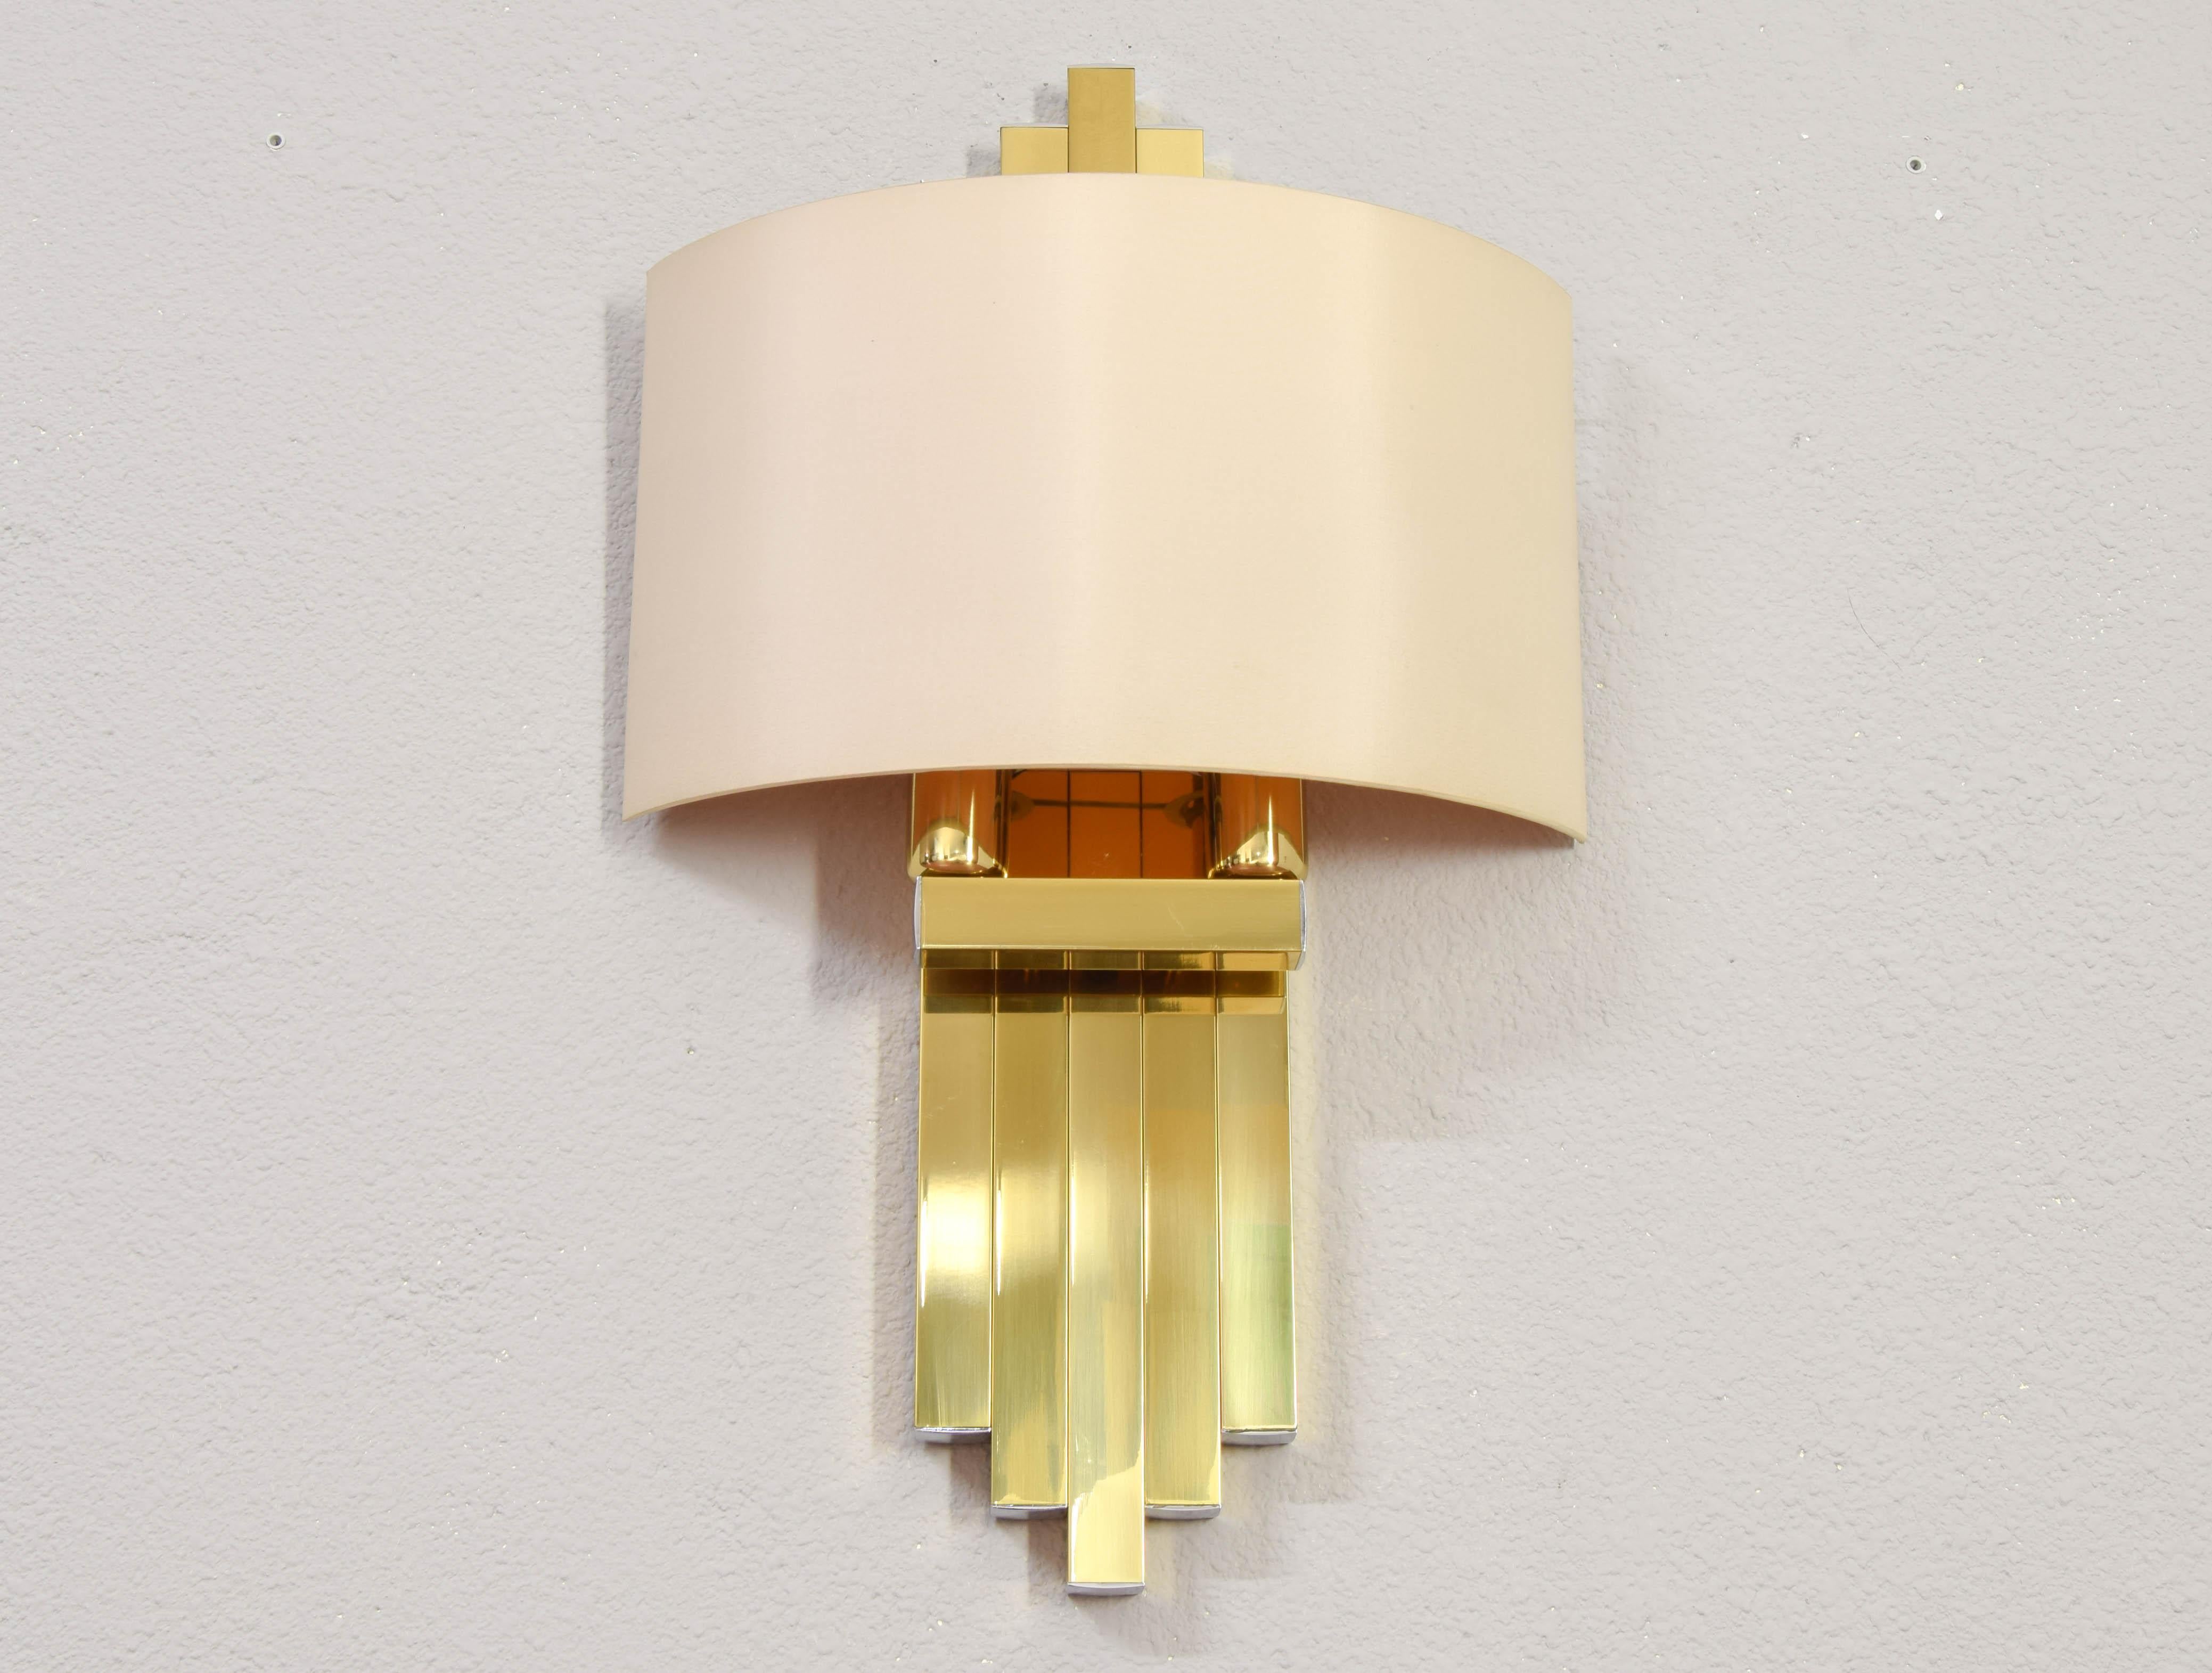 Sculptural wall light produced by Lumica BD in the 1970s in Spain.
A wonderful piece designed to dress a wall with elegance.
Body composed of golden steel bars and finished in brass with chrome finishes at the ends and beige satin